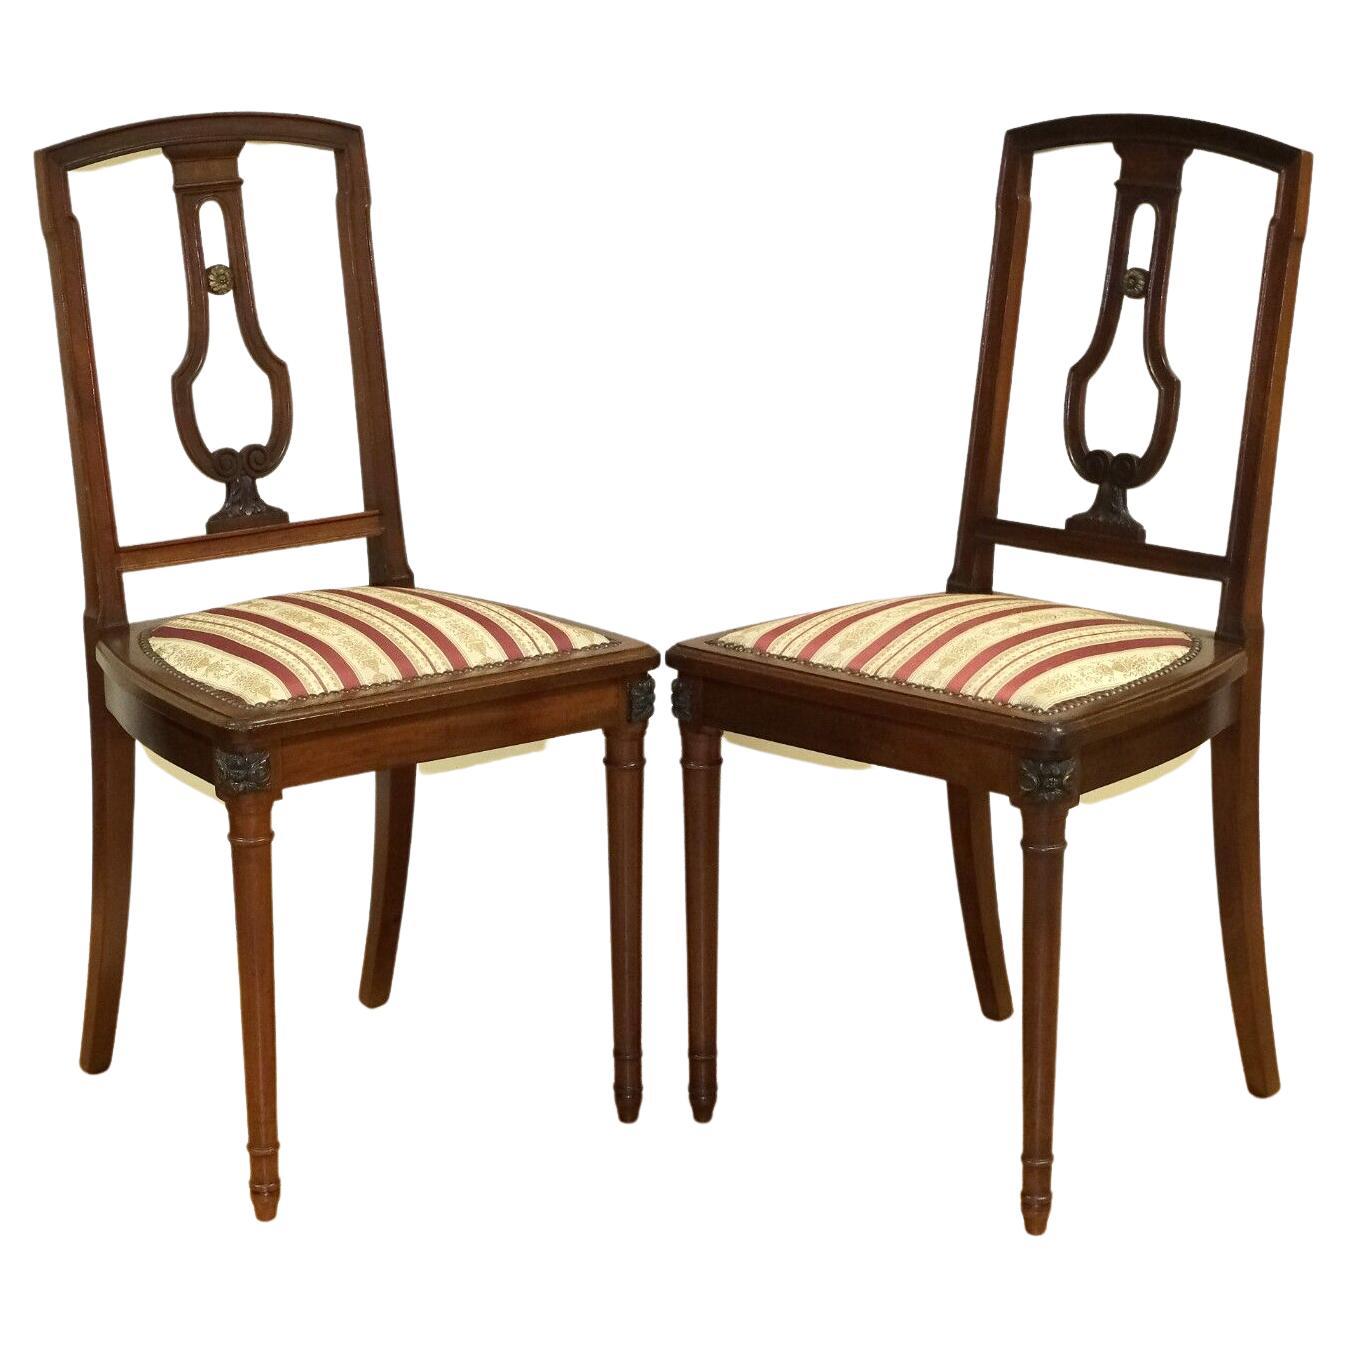 CHARMING PAIR OF OCCASIONAL HARDWOOD CHAIR WiTH STIPE FABRIC SEAT & STUDS